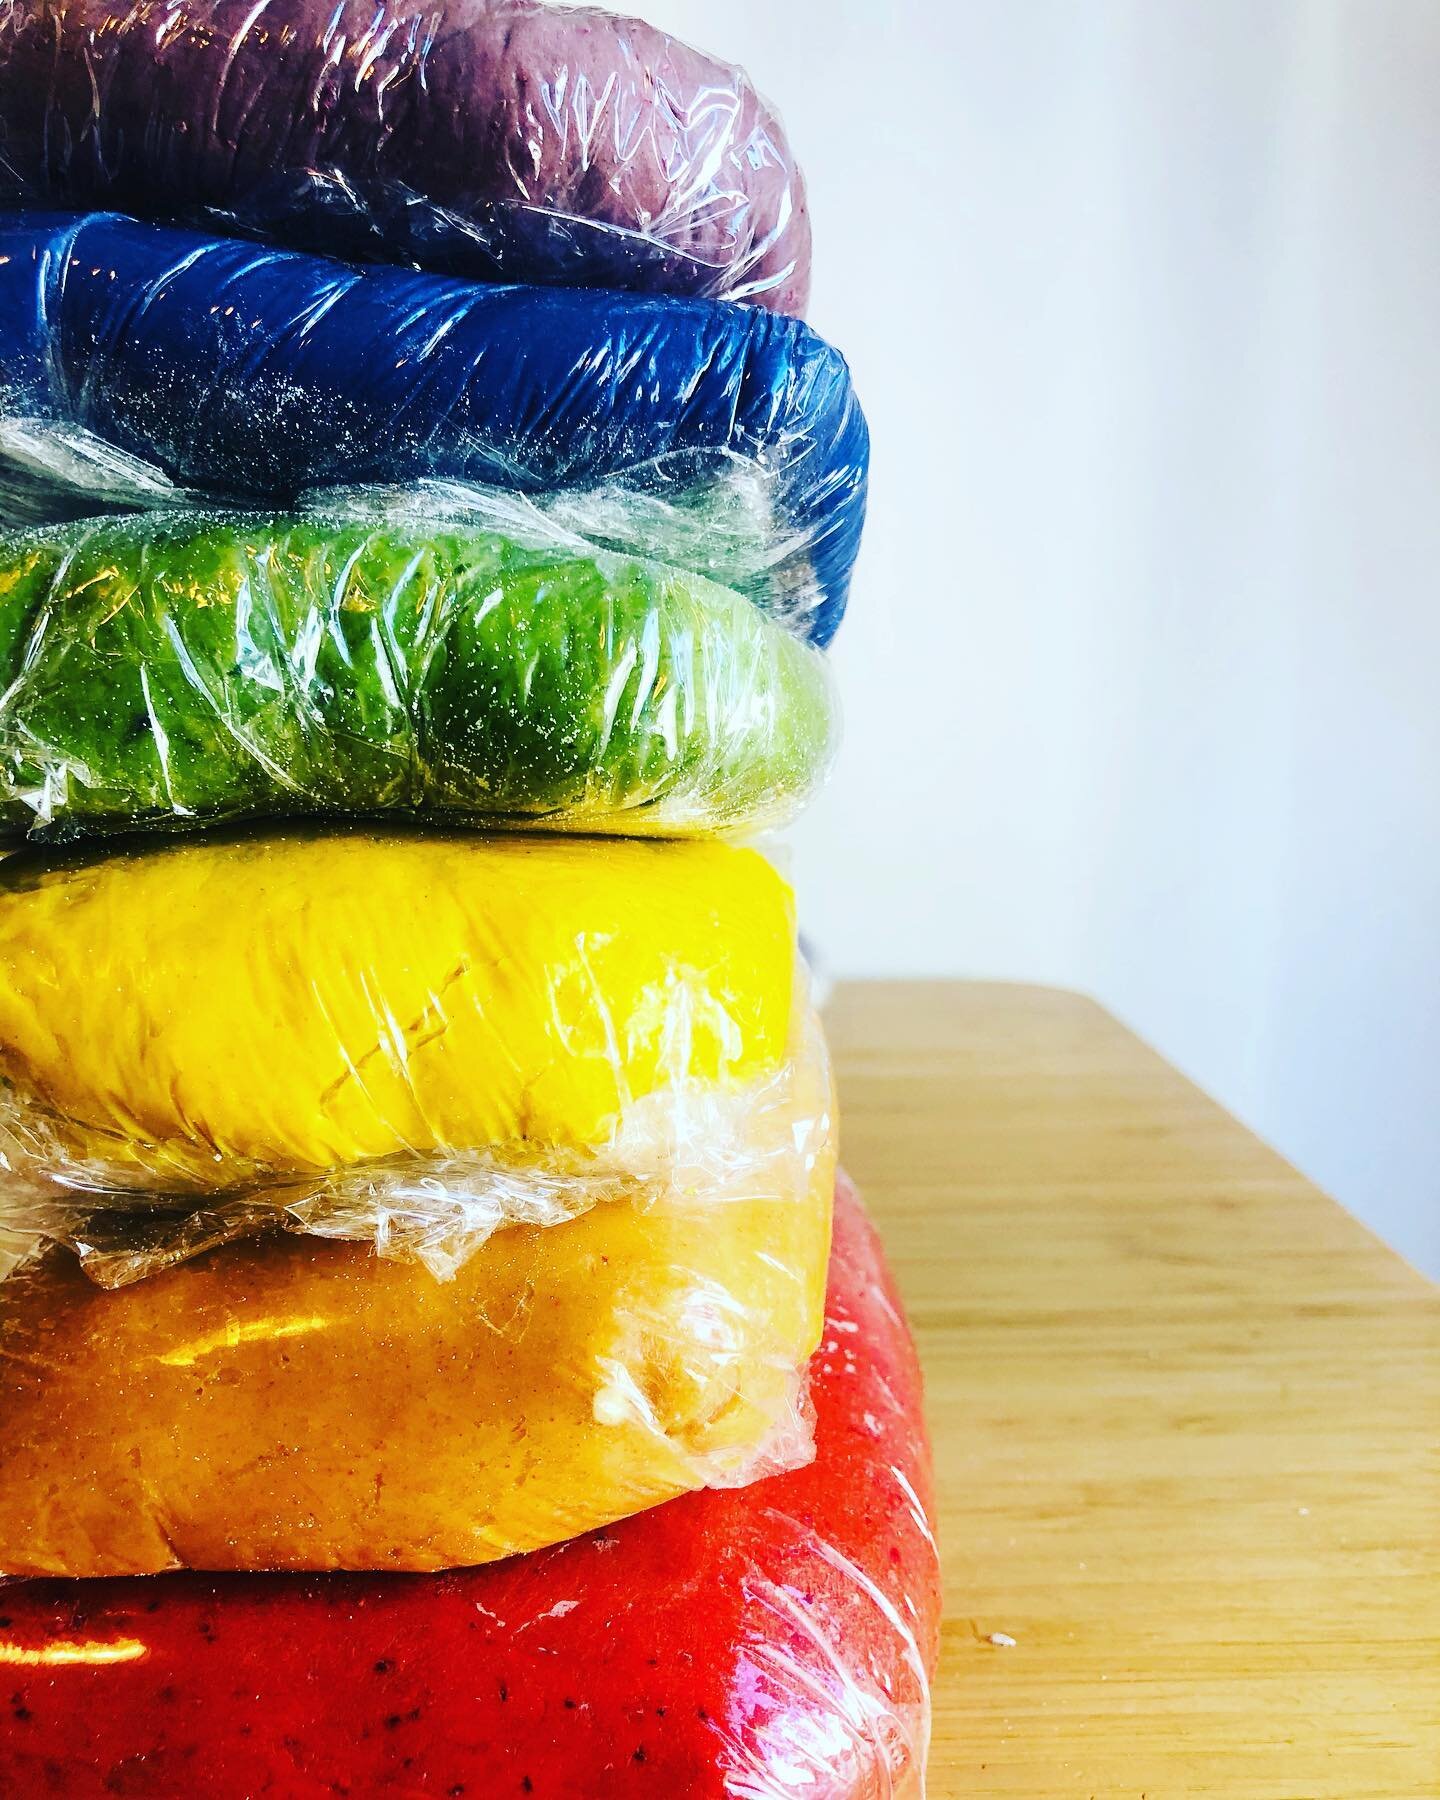 A+ for this pile. The competition was neck and neck this week, with lots of really excellent piles in my home vying for number one. Thank you to all the participants!
❤️🧡💛💚💙💜
.
.
.
#pastaia #dough #pastamaking